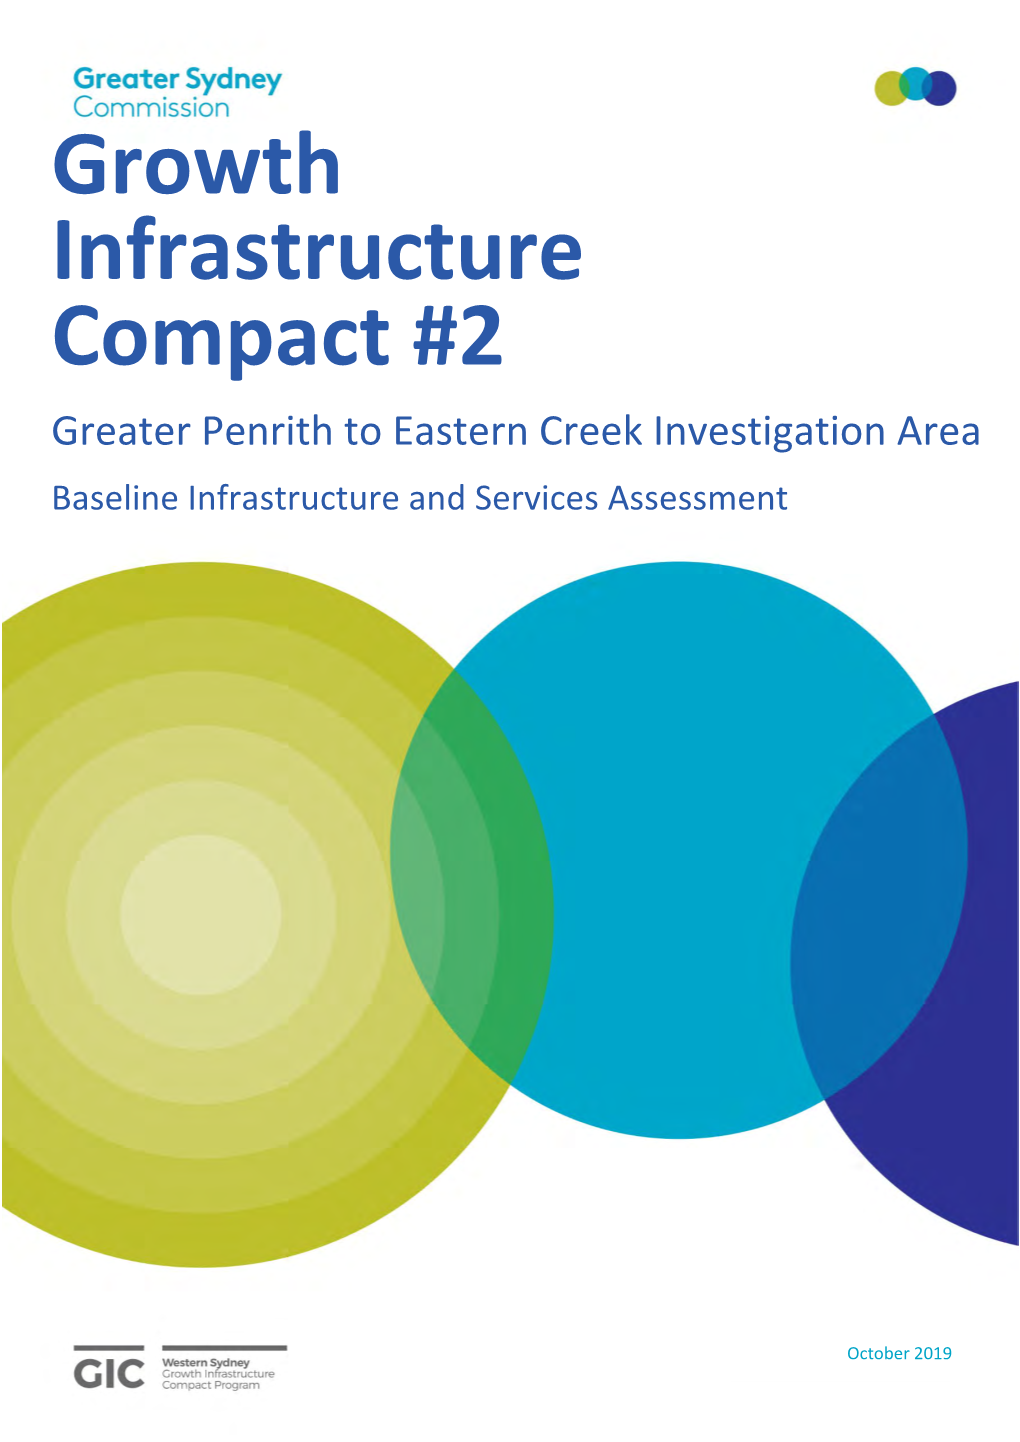 Growth Infrastructure Compact #2 Greater Penrith to Eastern Creek Investigation Area Baseline Infrastructure and Services Assessment